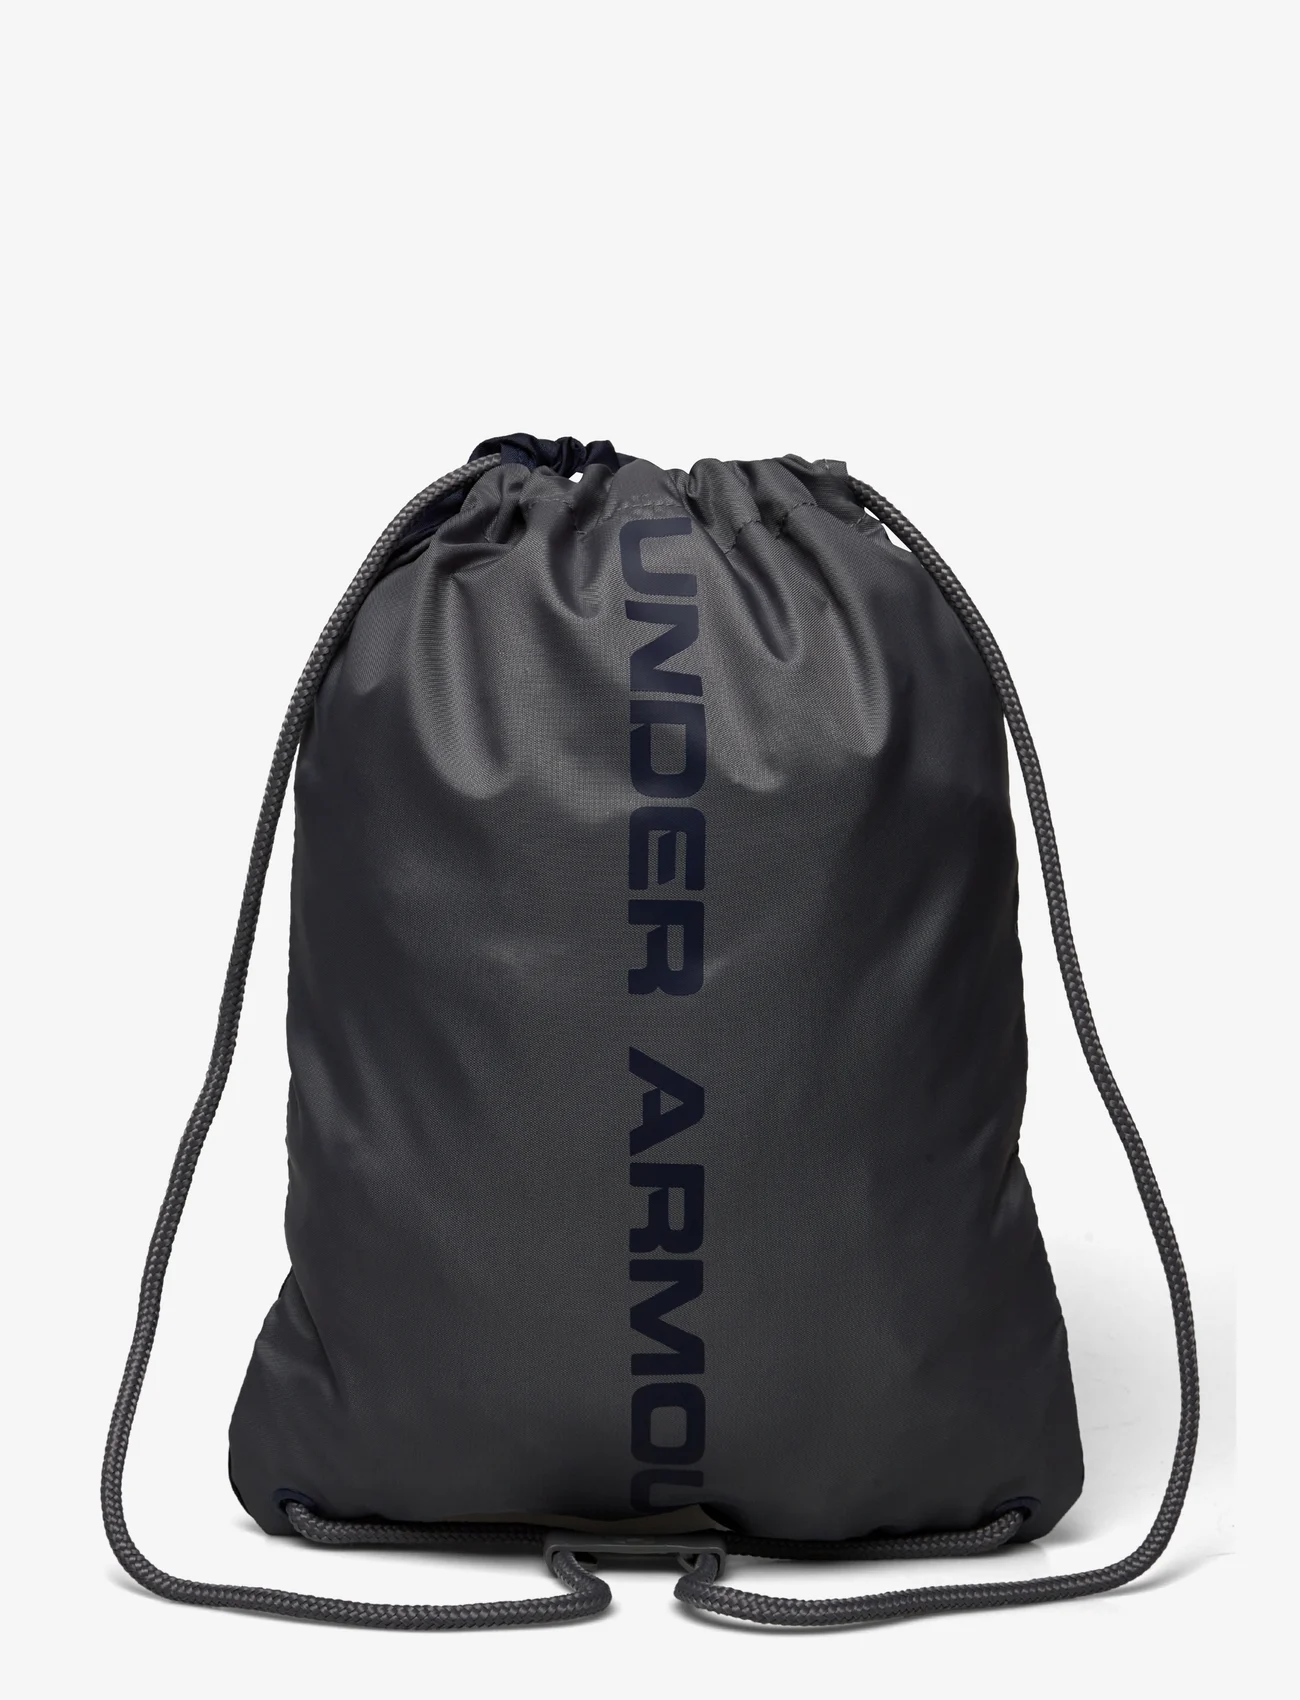 Under Armour - UA Ozsee Sackpack - prisfest - midnight navy - 1